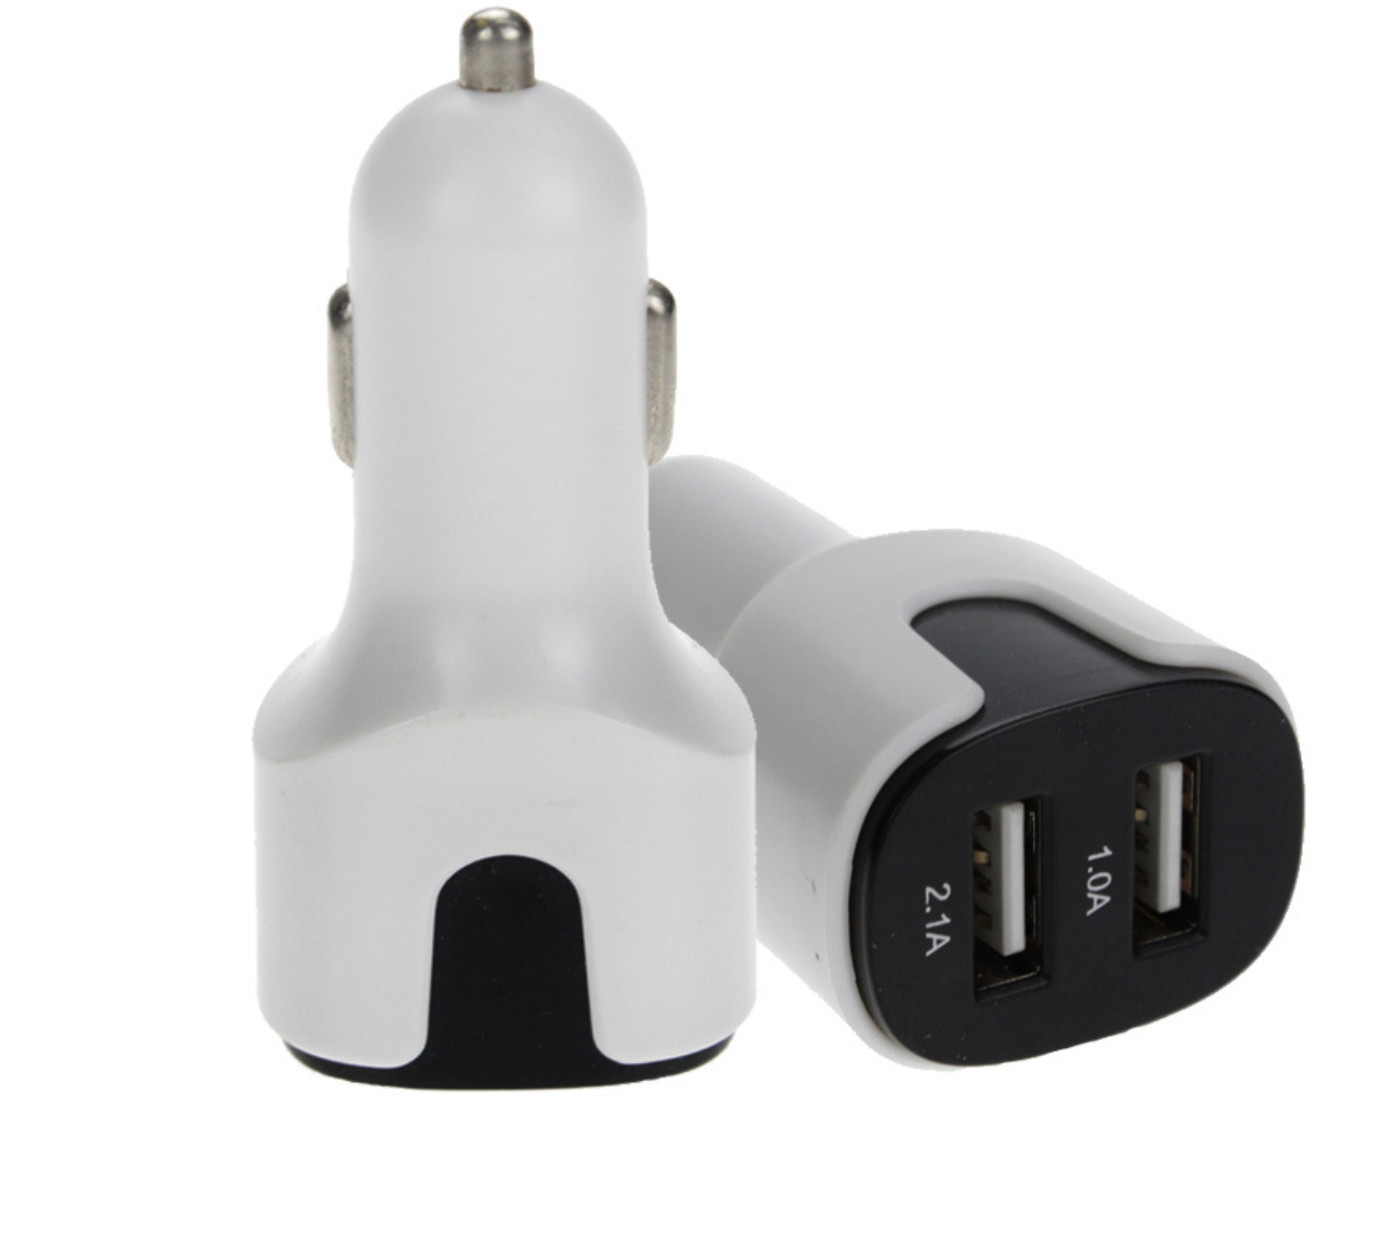 Dual USB led luminous car charger new fast USB car charger adapter quick charge USB3.0